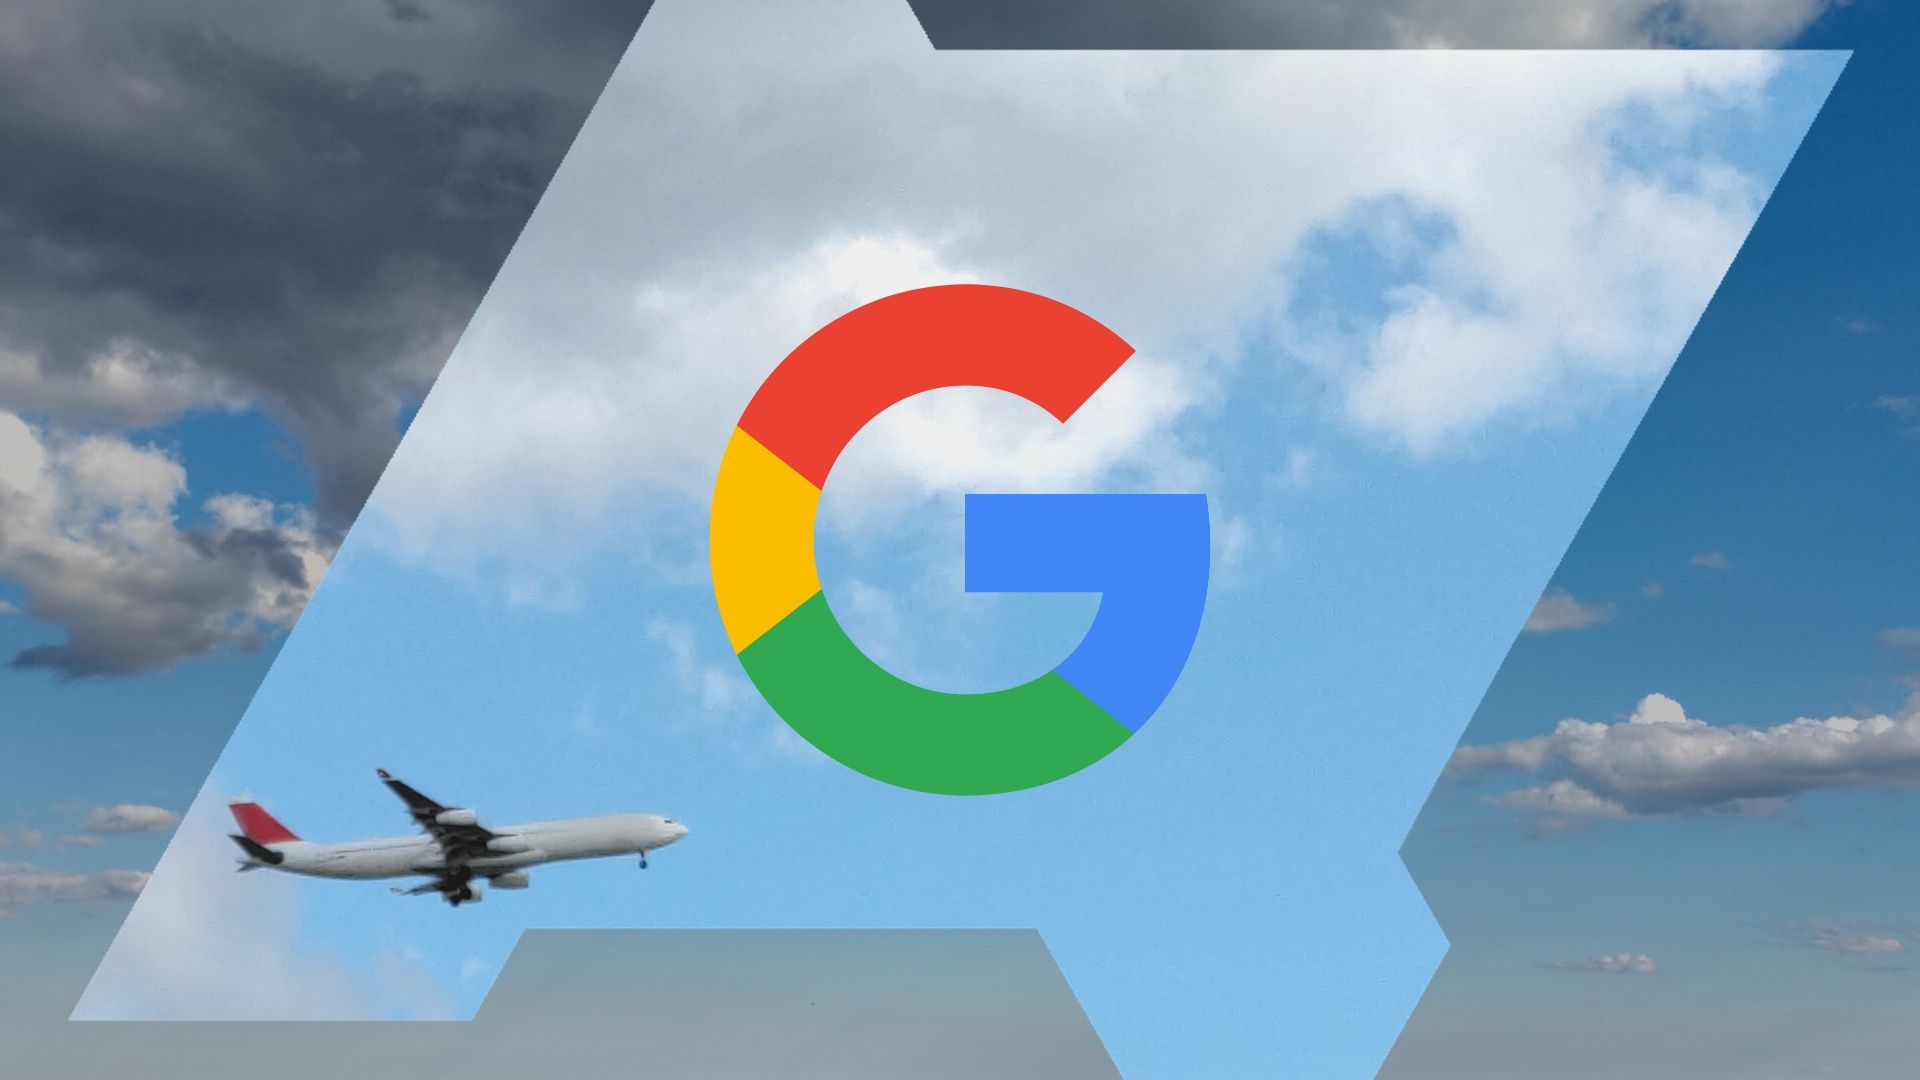 Google logo overlaid on a blue sky with a plane flying within a frame of the Android Police logo